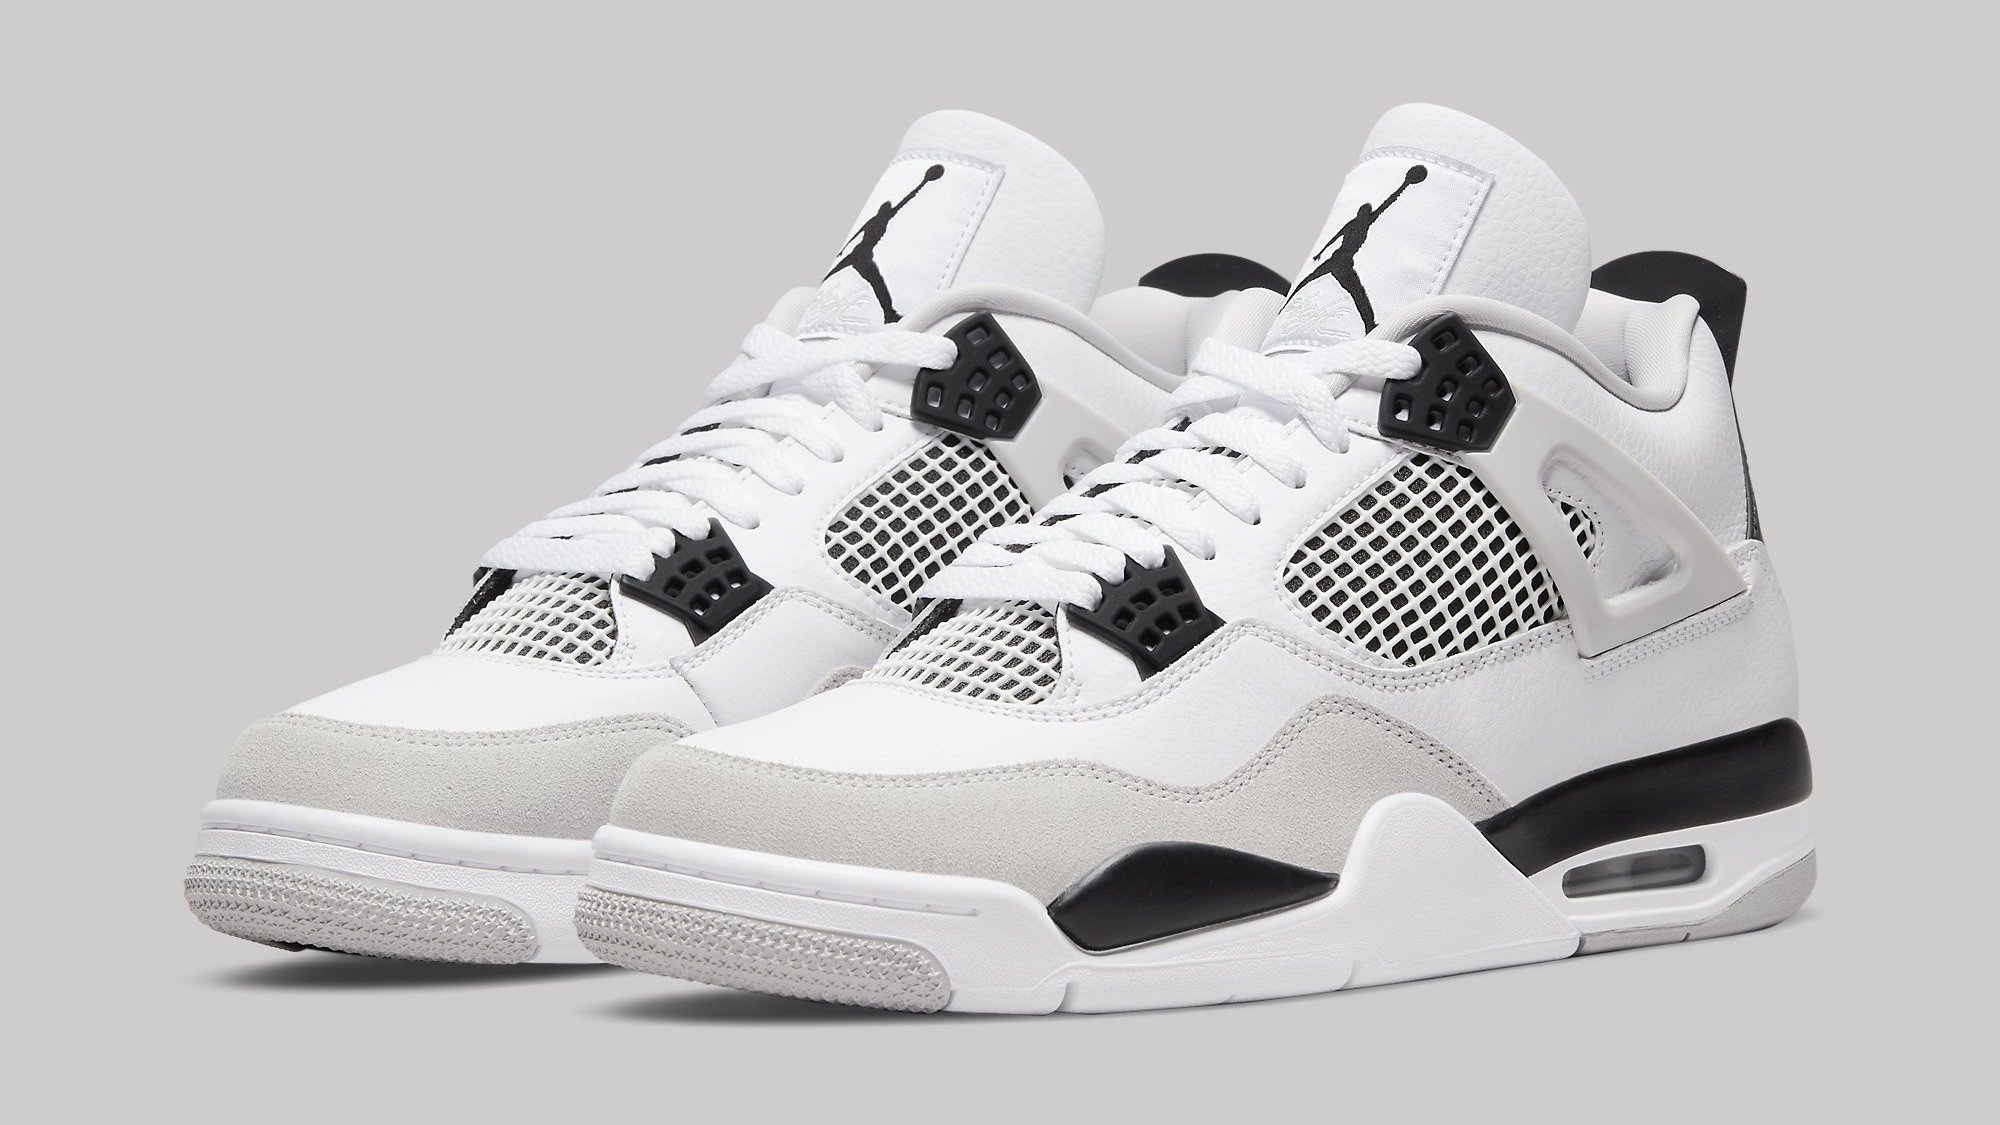 black and white jordans coming out